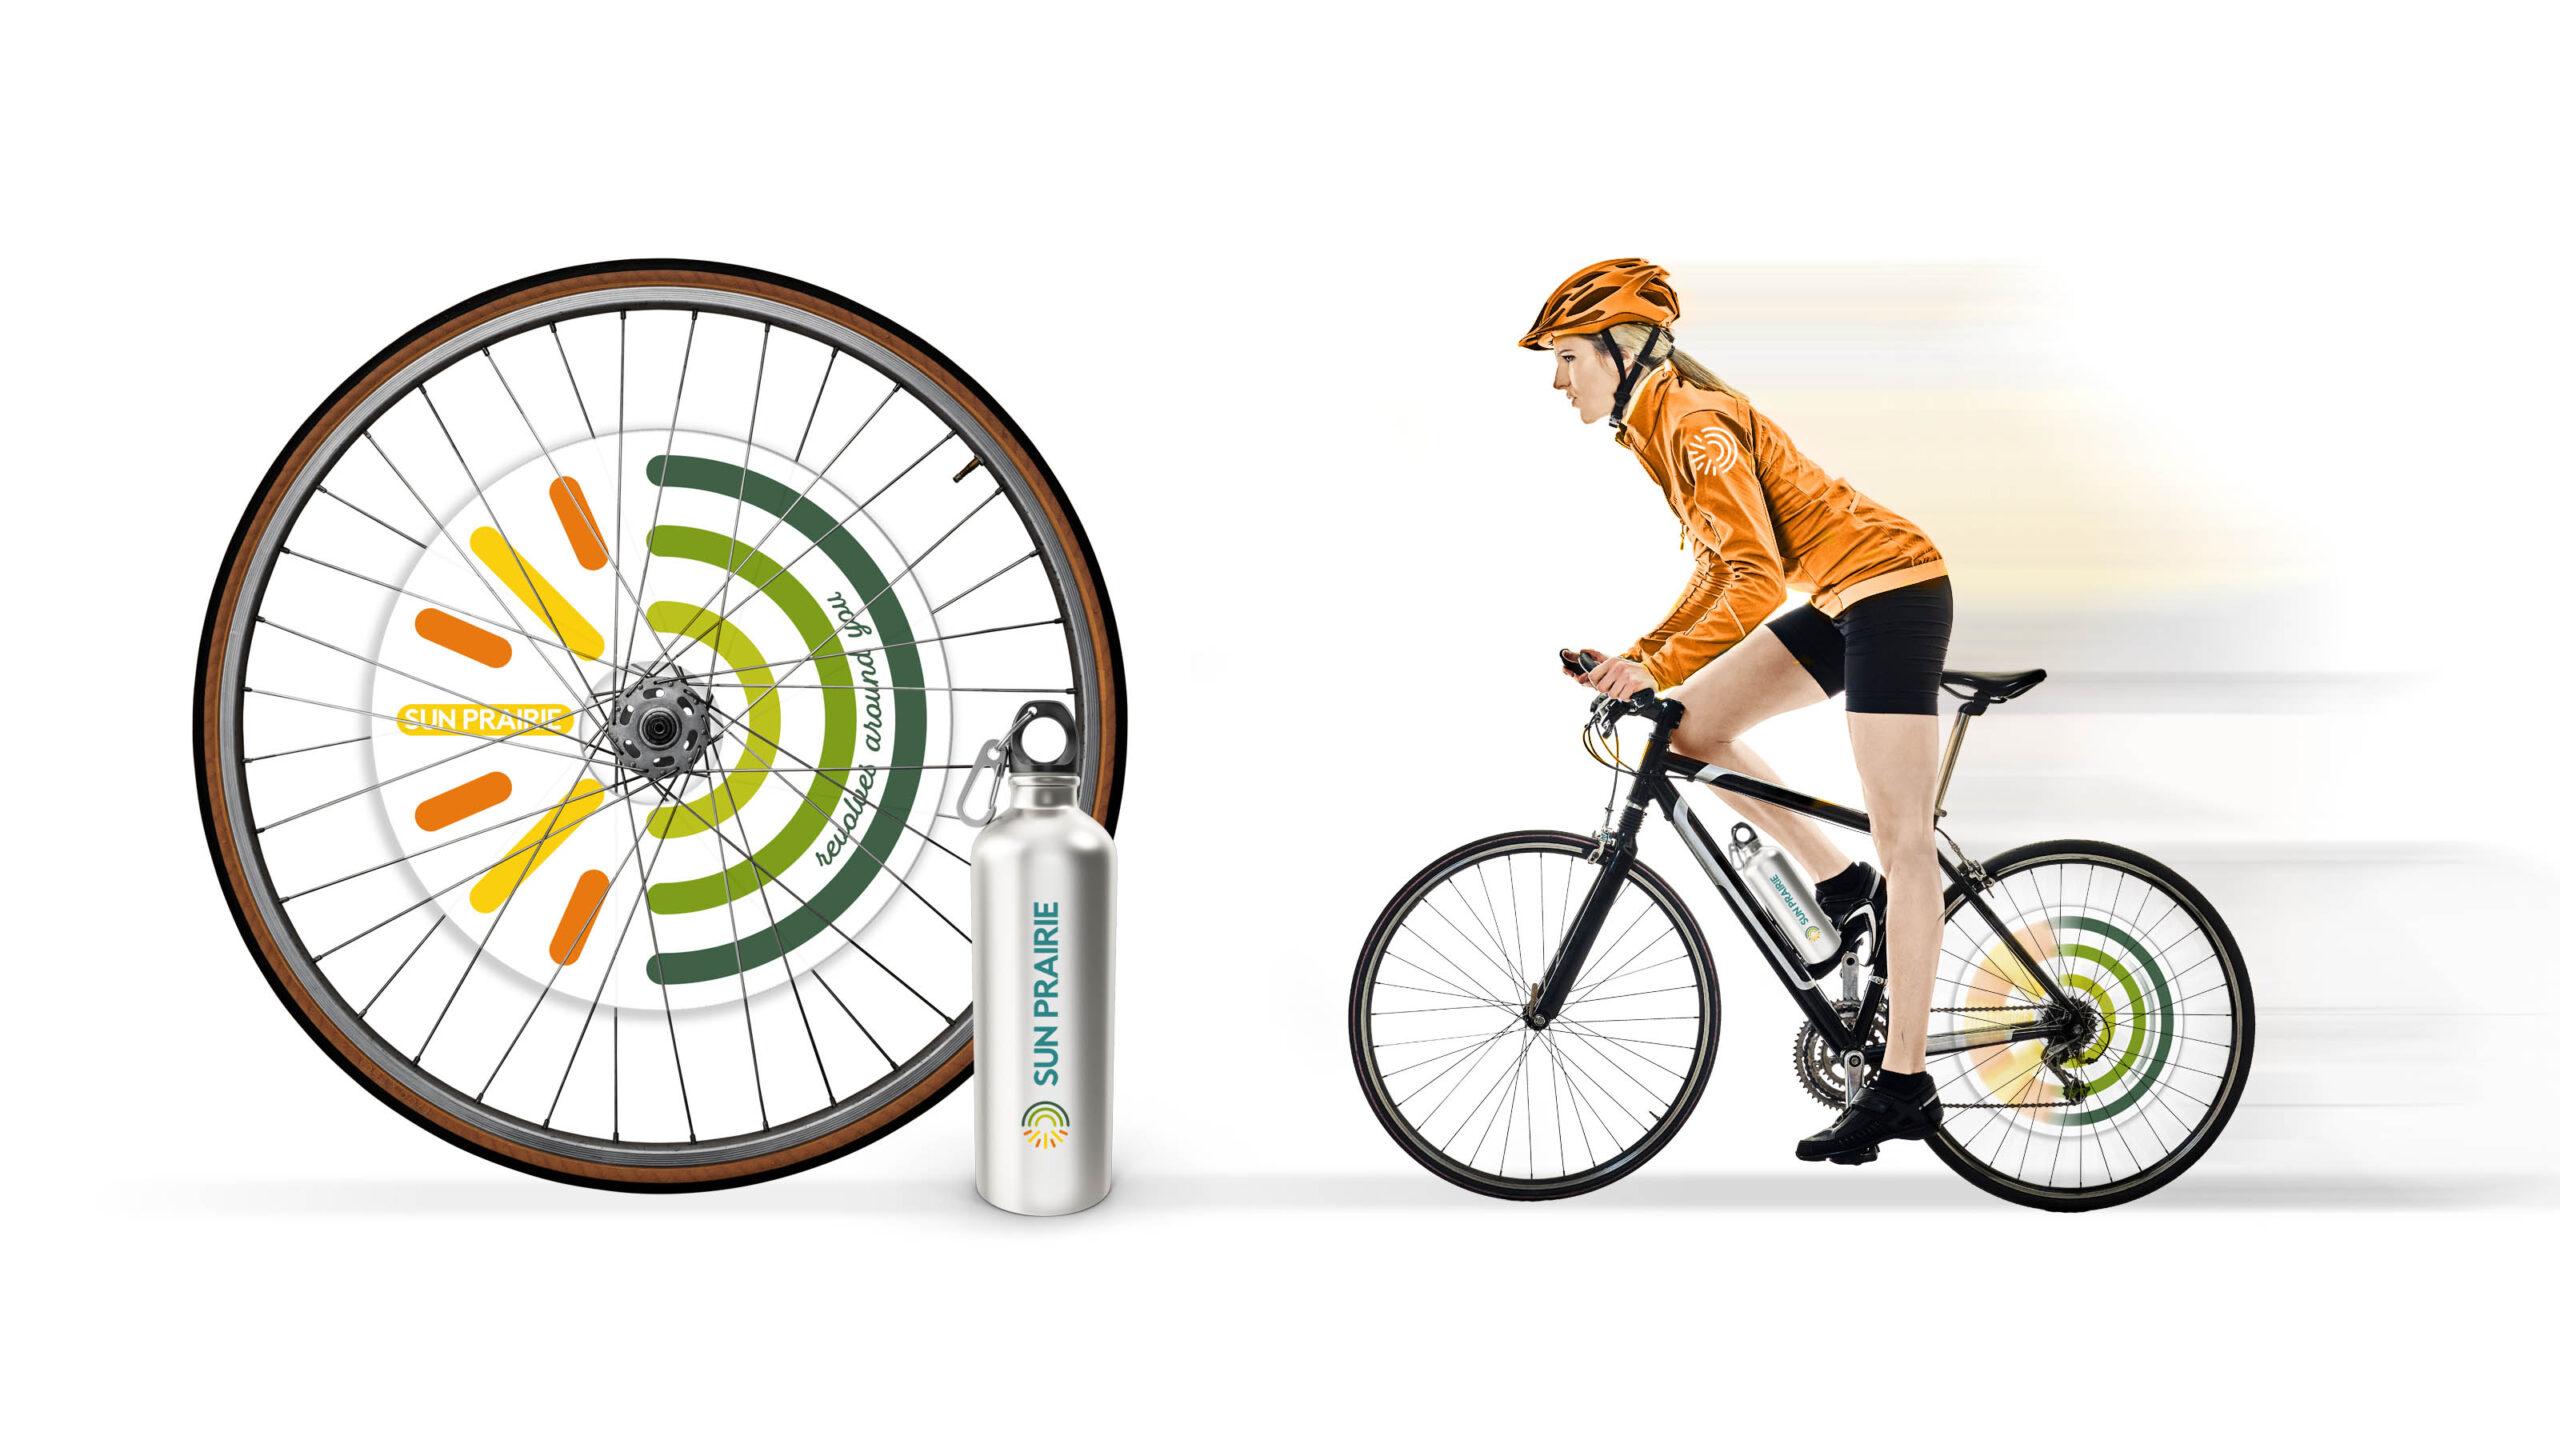 woman on bicycle with wheel featuring a revolving Sun Prairie logo